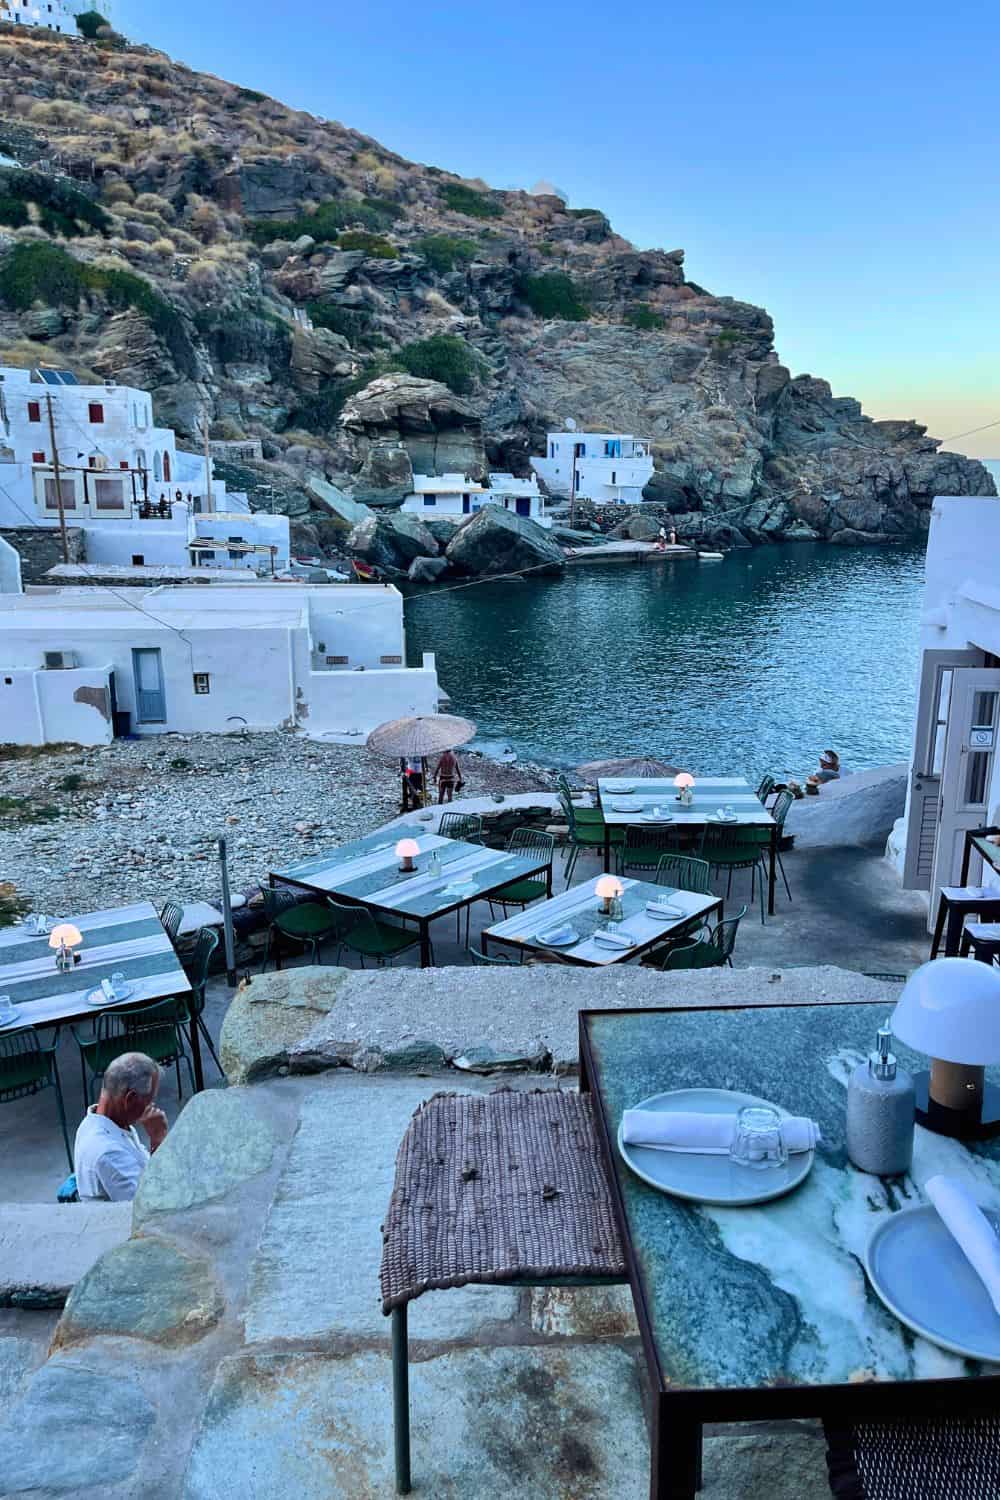 An evening dining setting by the sea in a quaint village, with green tables on a rocky shoreline, overlooking tranquil waters and white-washed buildings nestled against rugged cliffs.